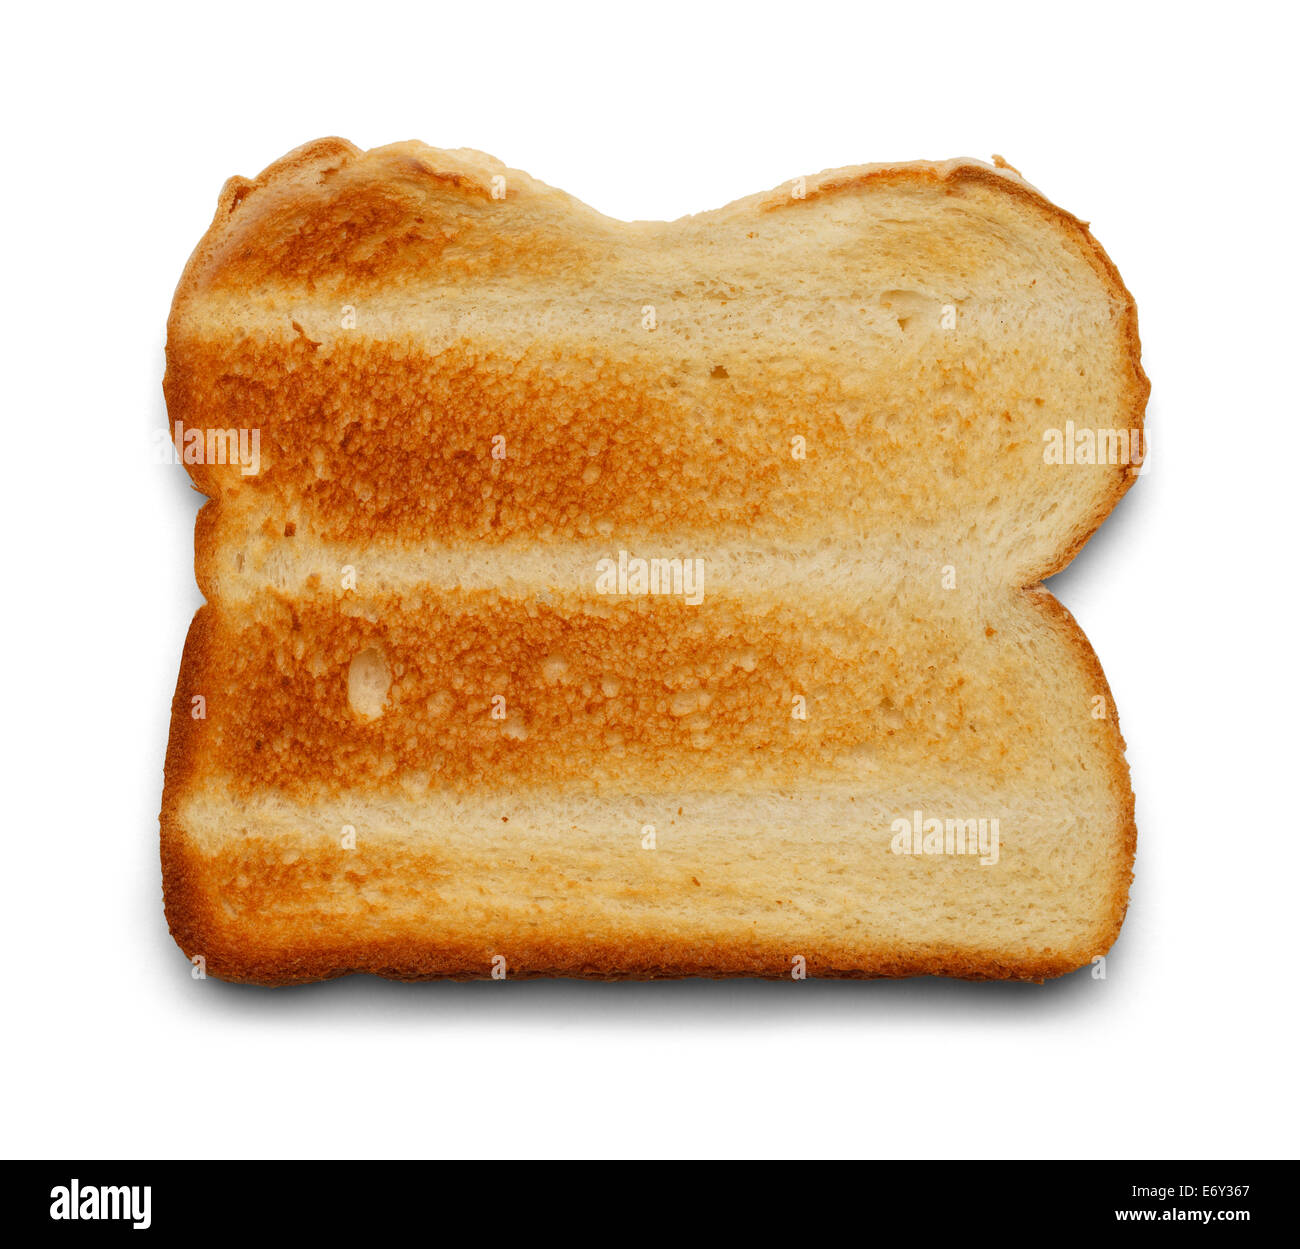 Piece of White Bread Toast Isolated on White Background. Stock Photo